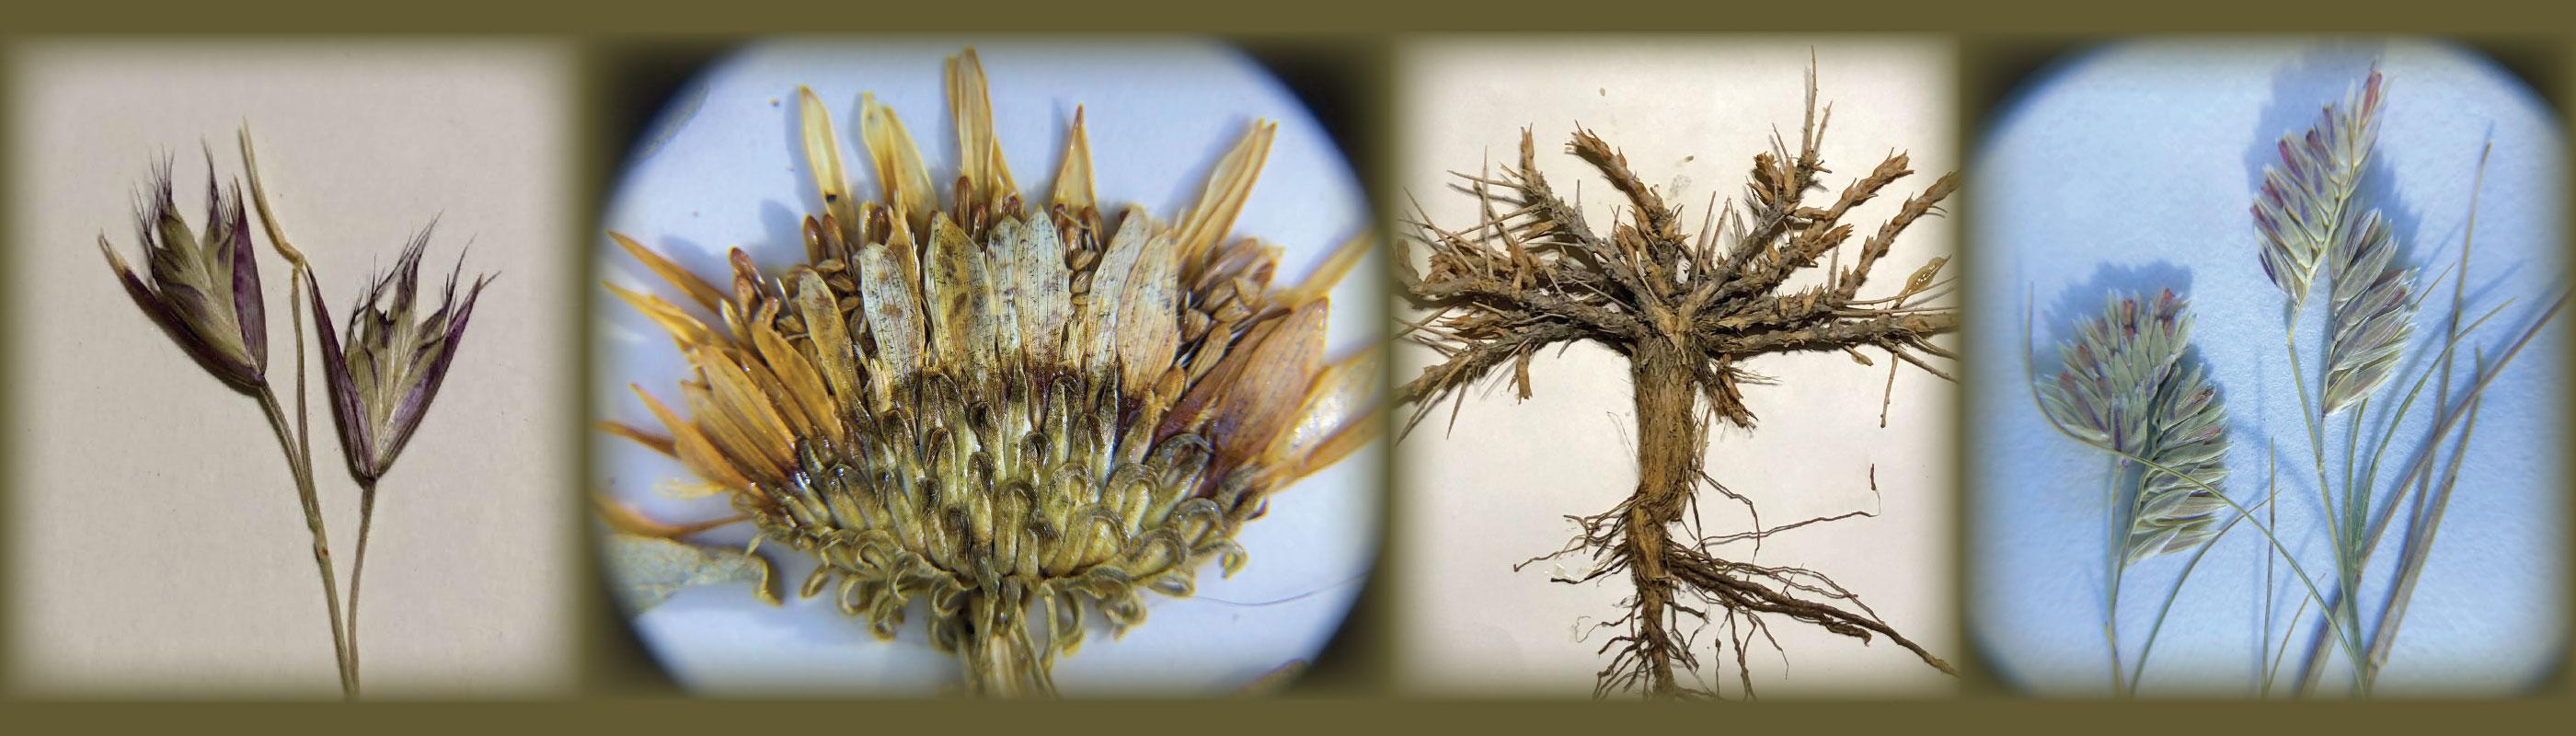 Examples of rangeland grasses and flowers